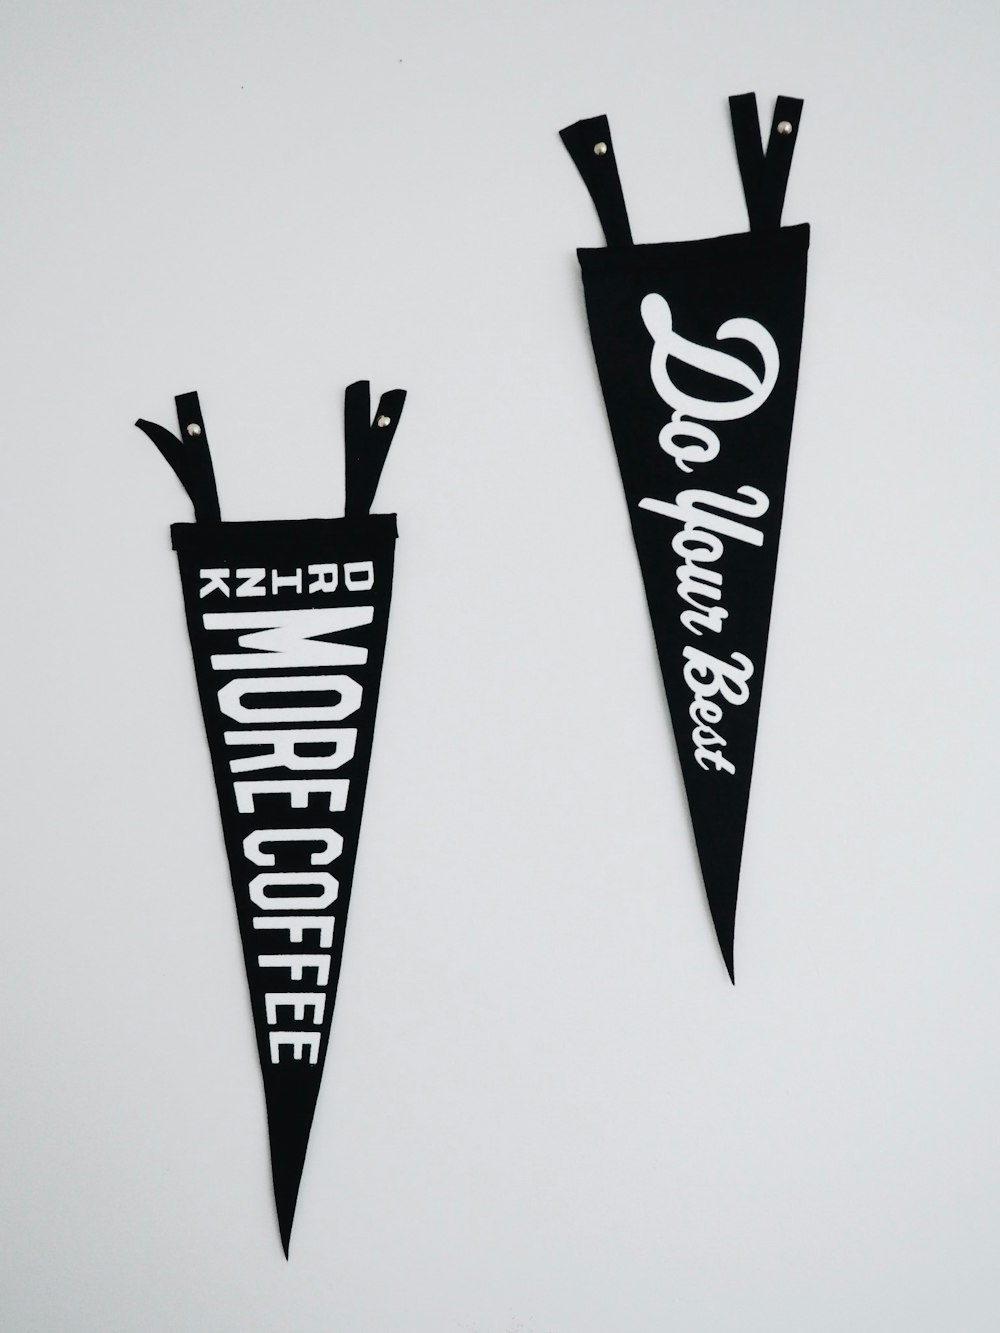 two black-and-white banners with texts